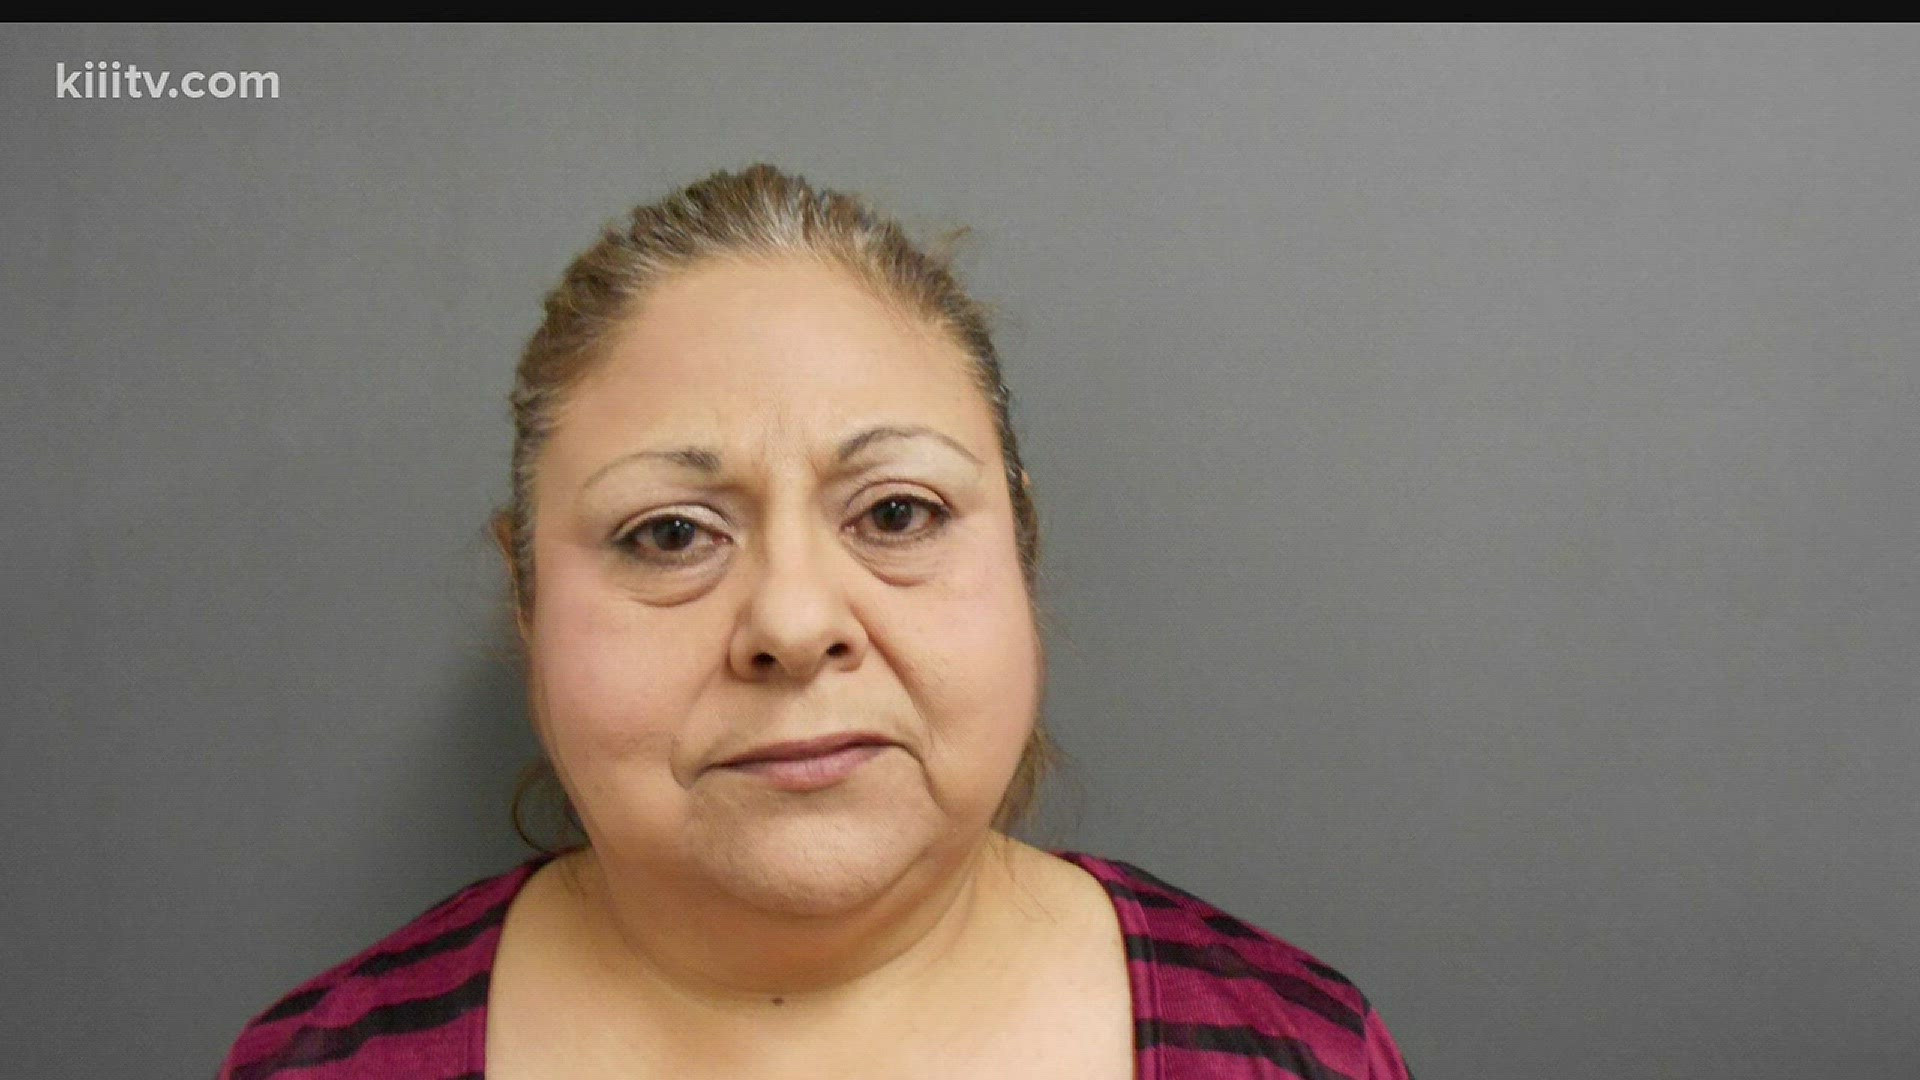 Two of the three suspects, Rosita Torres Flores and Robert Gonzalez, had already been arrested when Paxton made the announcement. A third suspect, Cynthia Kay Gonzalez, was arrested Thursday.